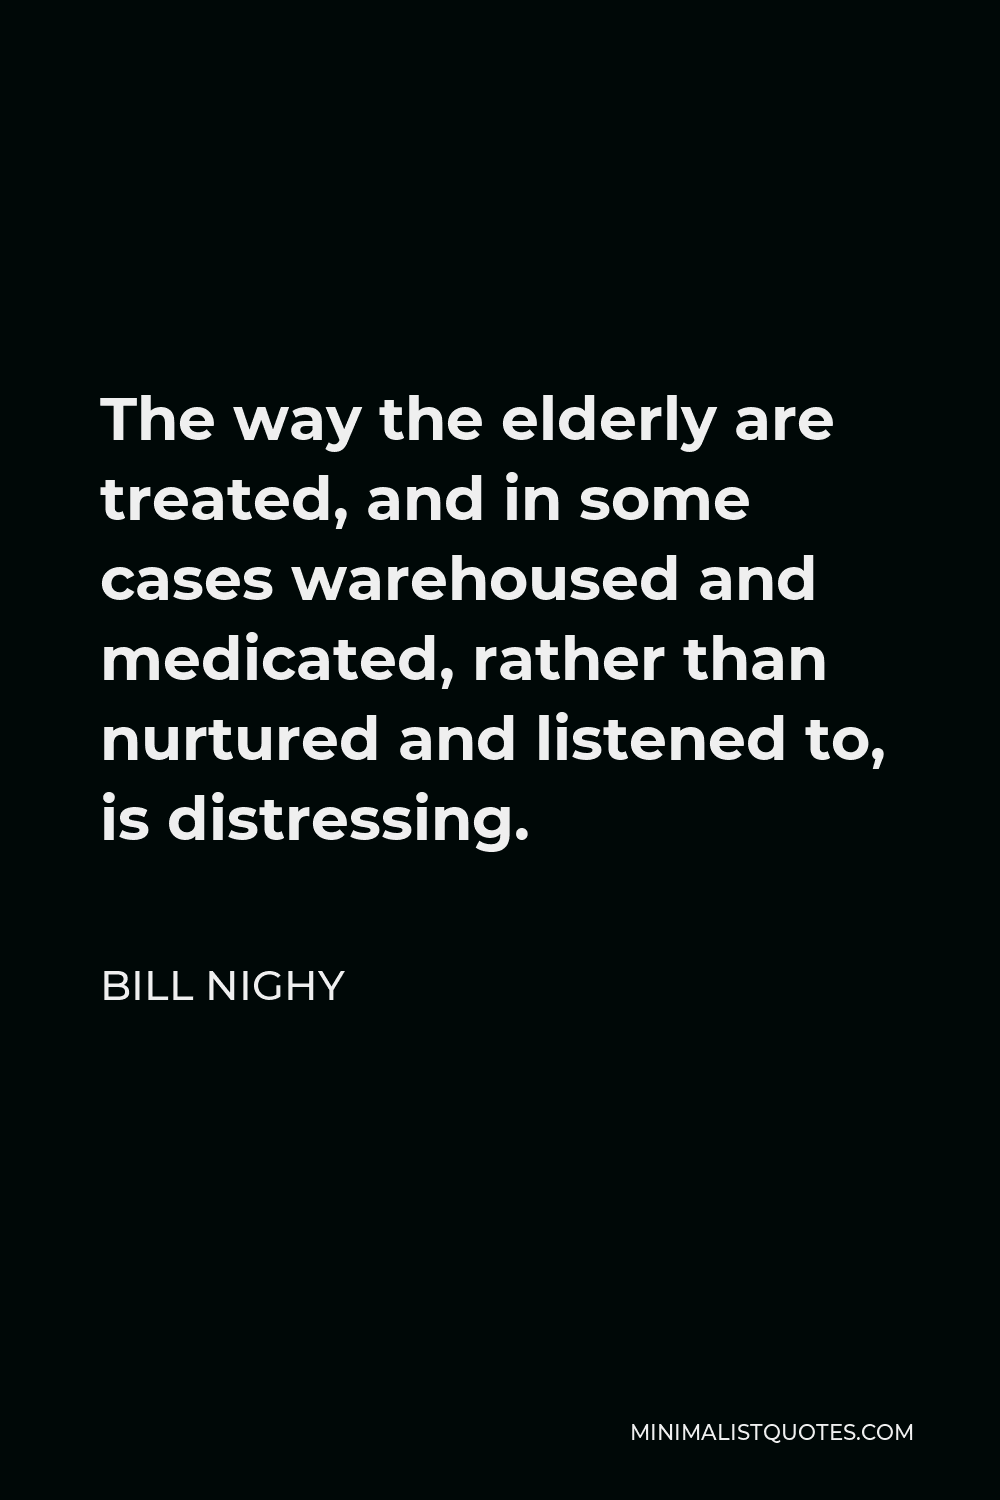 Bill Nighy Quote - The way the elderly are treated, and in some cases warehoused and medicated, rather than nurtured and listened to, is distressing.